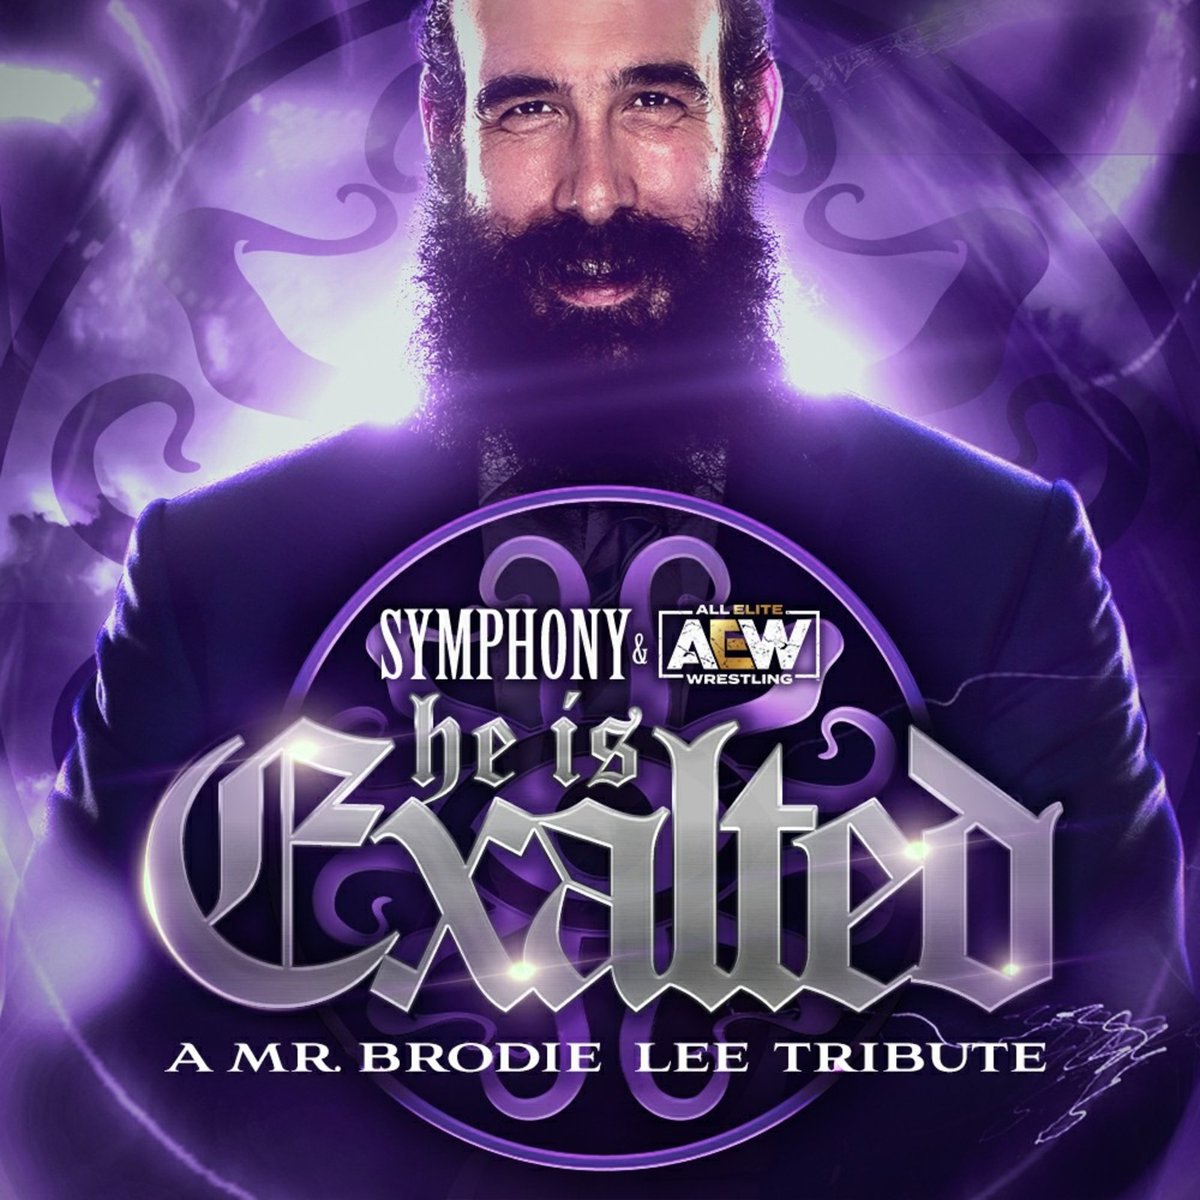 You've heard his theme. Now, @MikeyRukus has taken it and created a heartfelt musical number, SYMPHONY & AEW: A MR. BRODIE LEE TRIBUTE for direct download/streaming- Will hit all major platforms next week. Bandcamp: bit.ly/2WV8RH5 Soundcloud: bit.ly/3hqXgcq